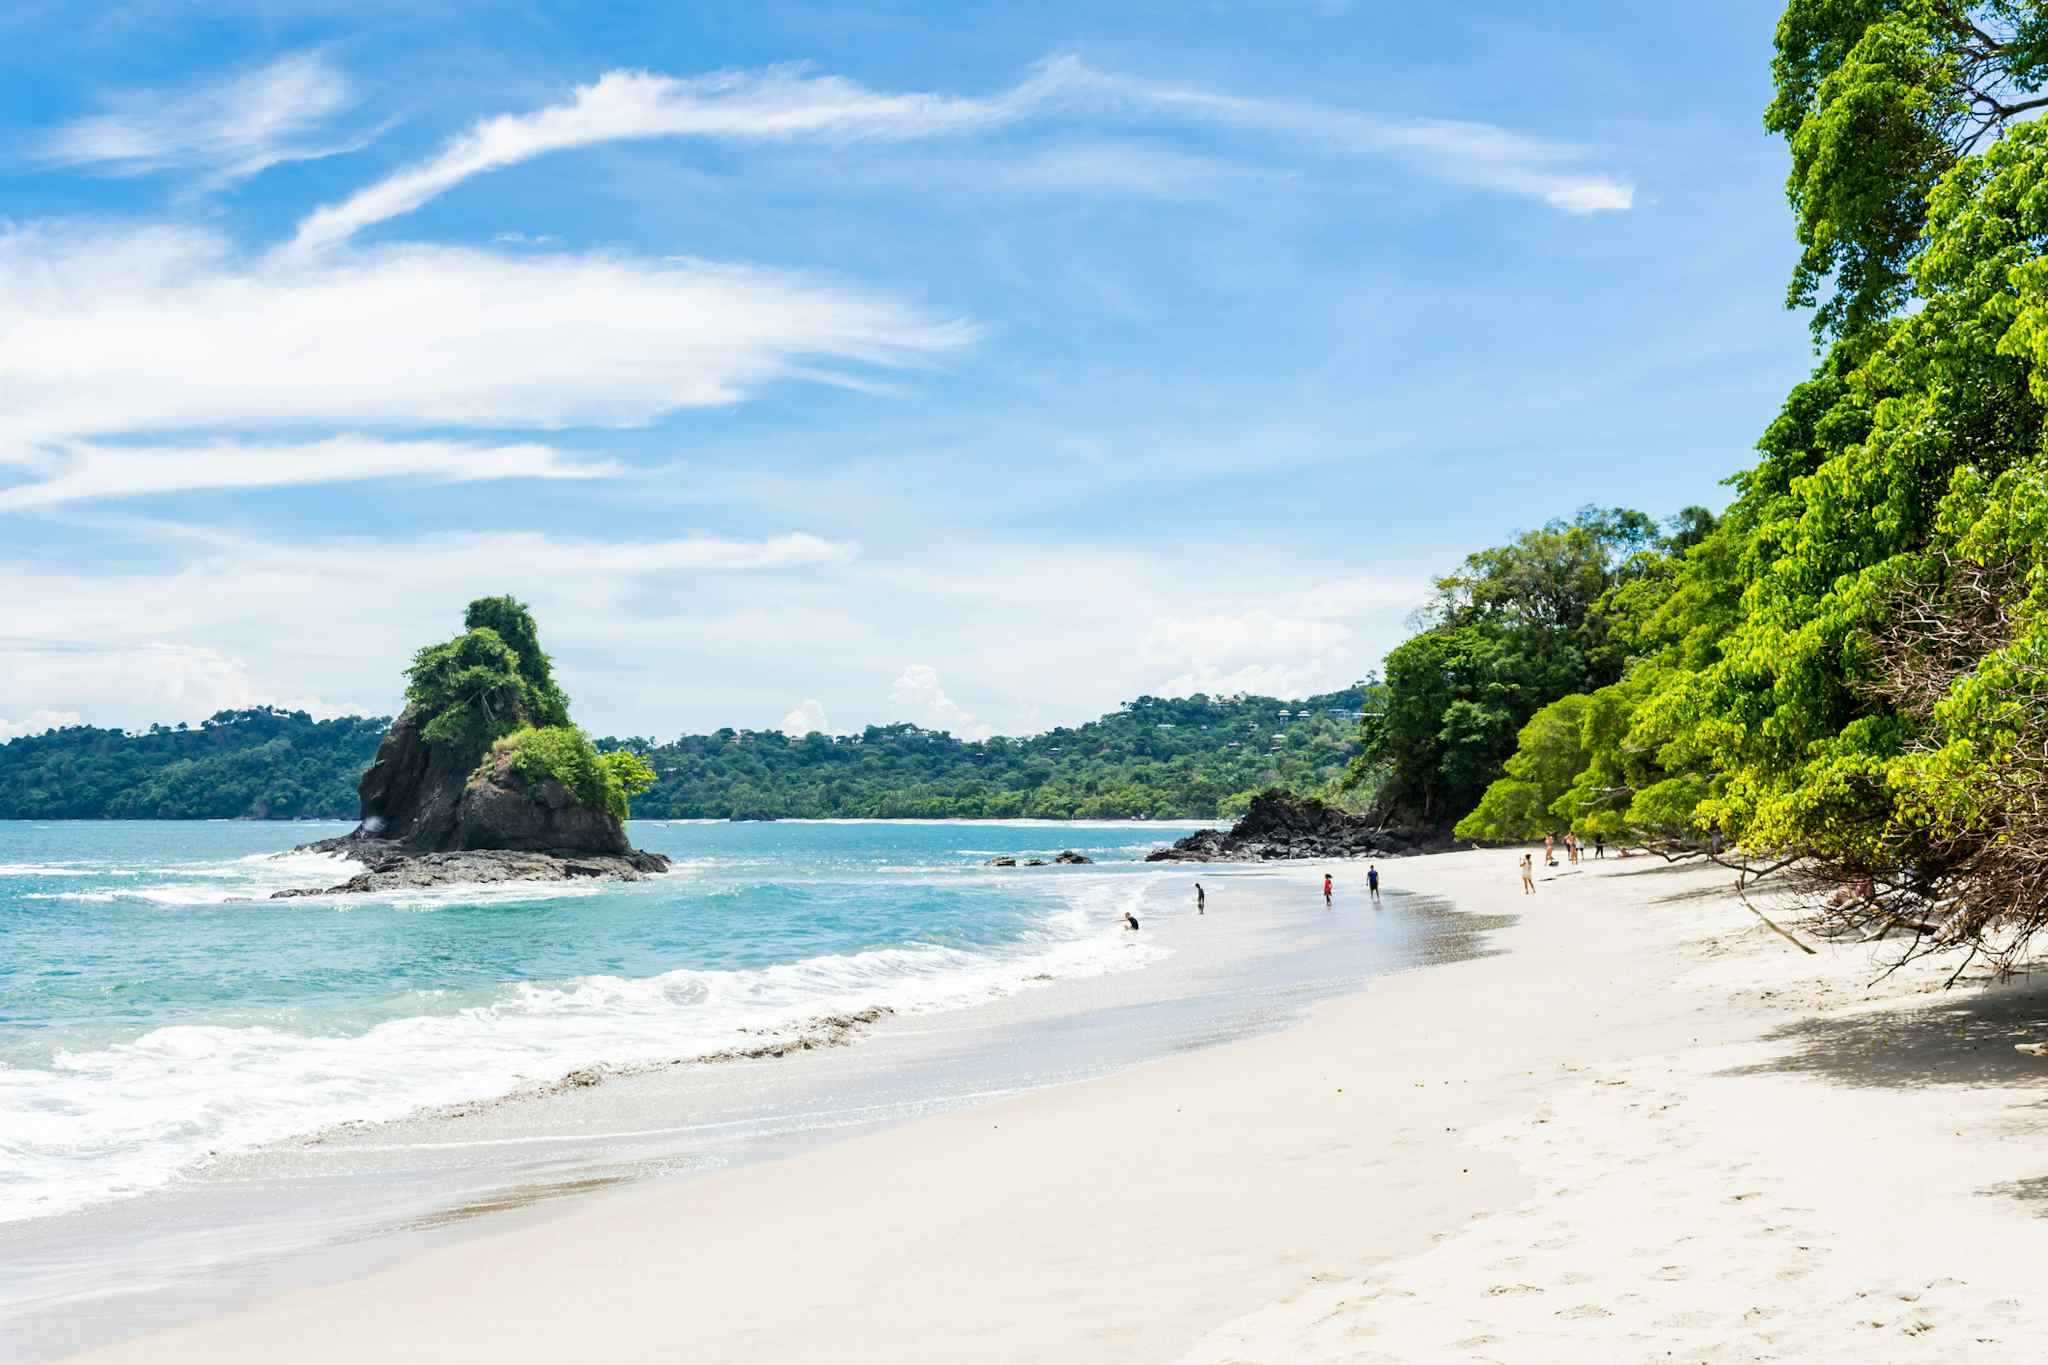 Beach backed by verdant forest in Manuel Antonio, Costa Rica
